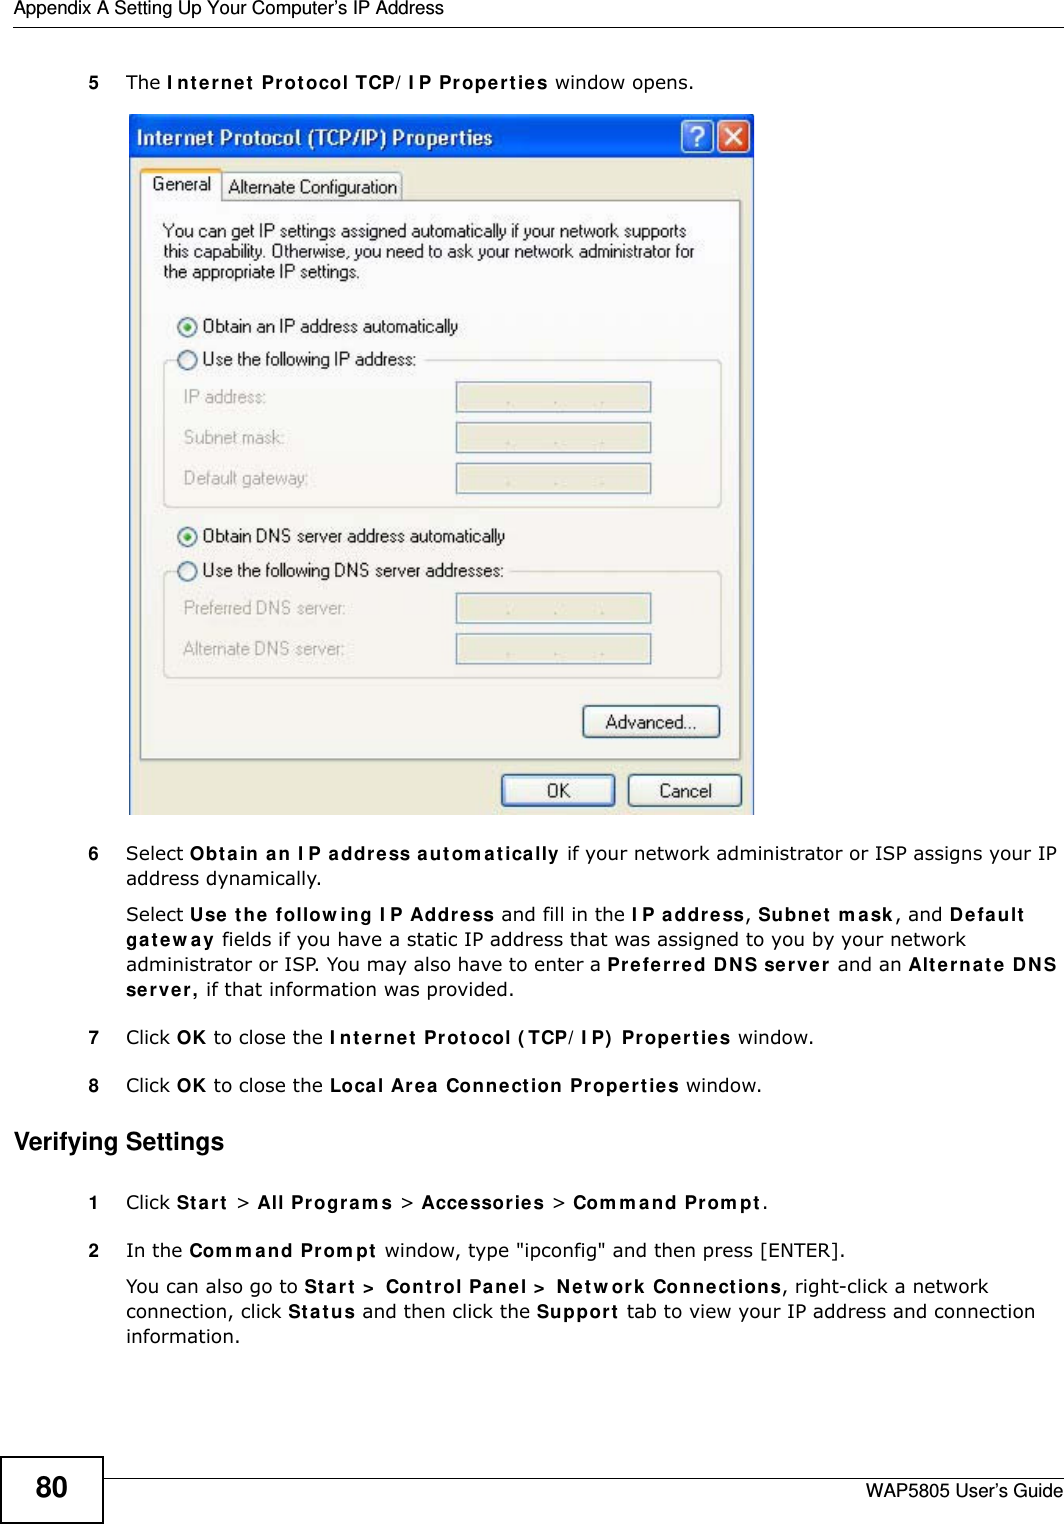 Appendix A Setting Up Your Computer’s IP AddressWAP5805 User’s Guide805The Internet Protocol TCP/IP Properties window opens.6Select Obtain an IP address automatically if your network administrator or ISP assigns your IP address dynamically.Select Use the following IP Address and fill in the IP address, Subnet mask, and Default gateway fields if you have a static IP address that was assigned to you by your network administrator or ISP. You may also have to enter a Preferred DNS server and an Alternate DNS server, if that information was provided.7Click OK to close the Internet Protocol (TCP/IP) Properties window.8Click OK to close the Local Area Connection Properties window.Verifying Settings1Click Start &gt; All Programs &gt; Accessories &gt; Command Prompt.2In the Command Prompt window, type &quot;ipconfig&quot; and then press [ENTER]. You can also go to Start &gt; Control Panel &gt; Network Connections, right-click a network connection, click Status and then click the Support tab to view your IP address and connection information.